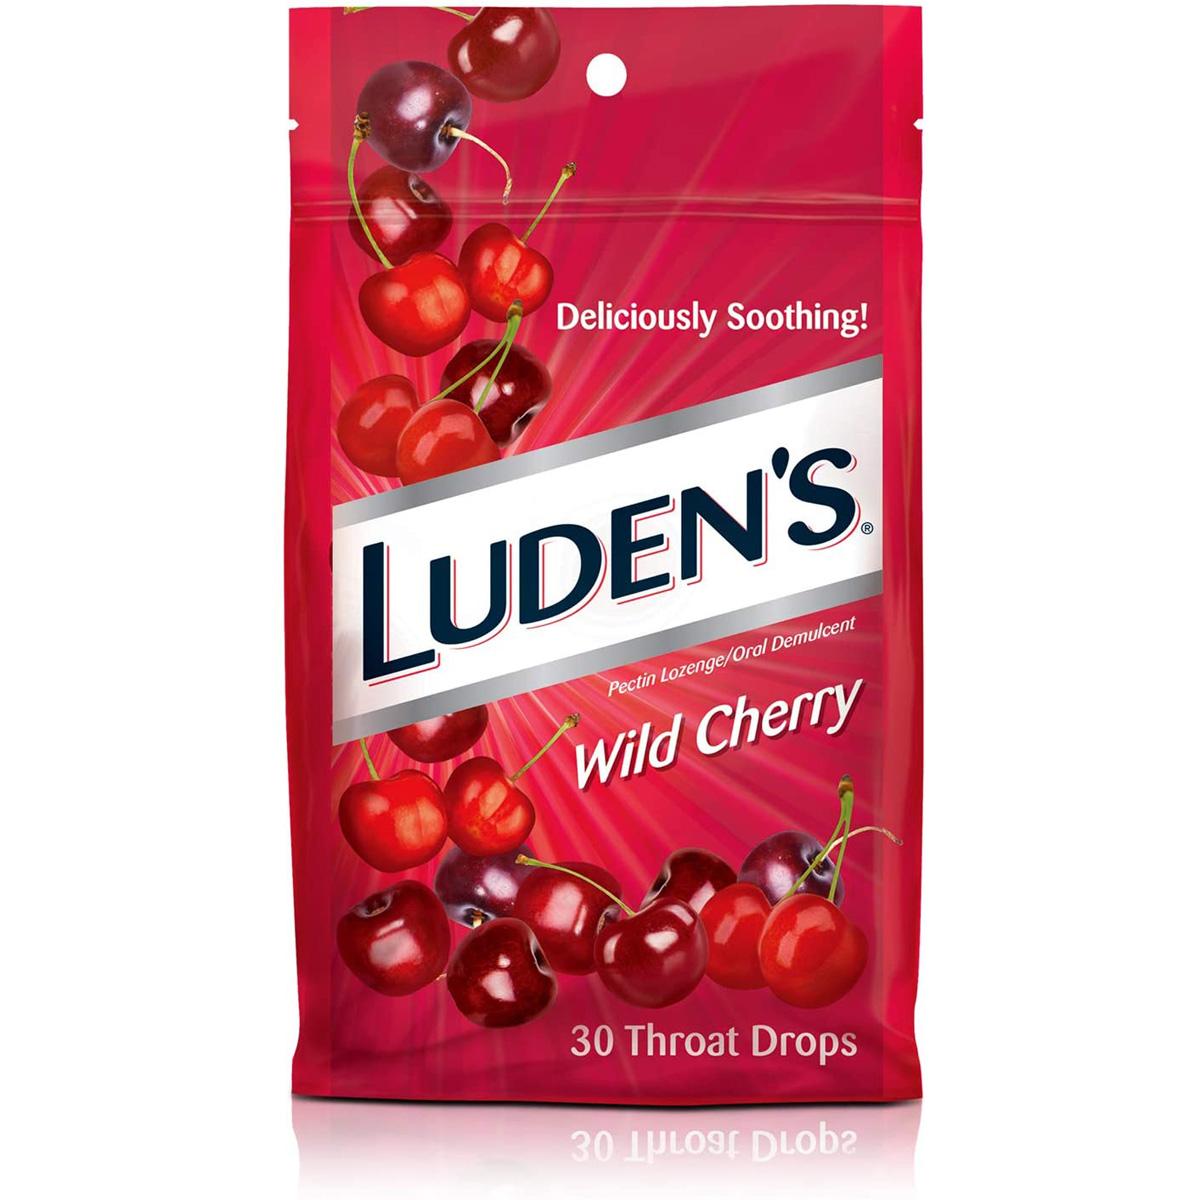 30 Ludens Wild Cherry Throat Drops for $1 Shipped